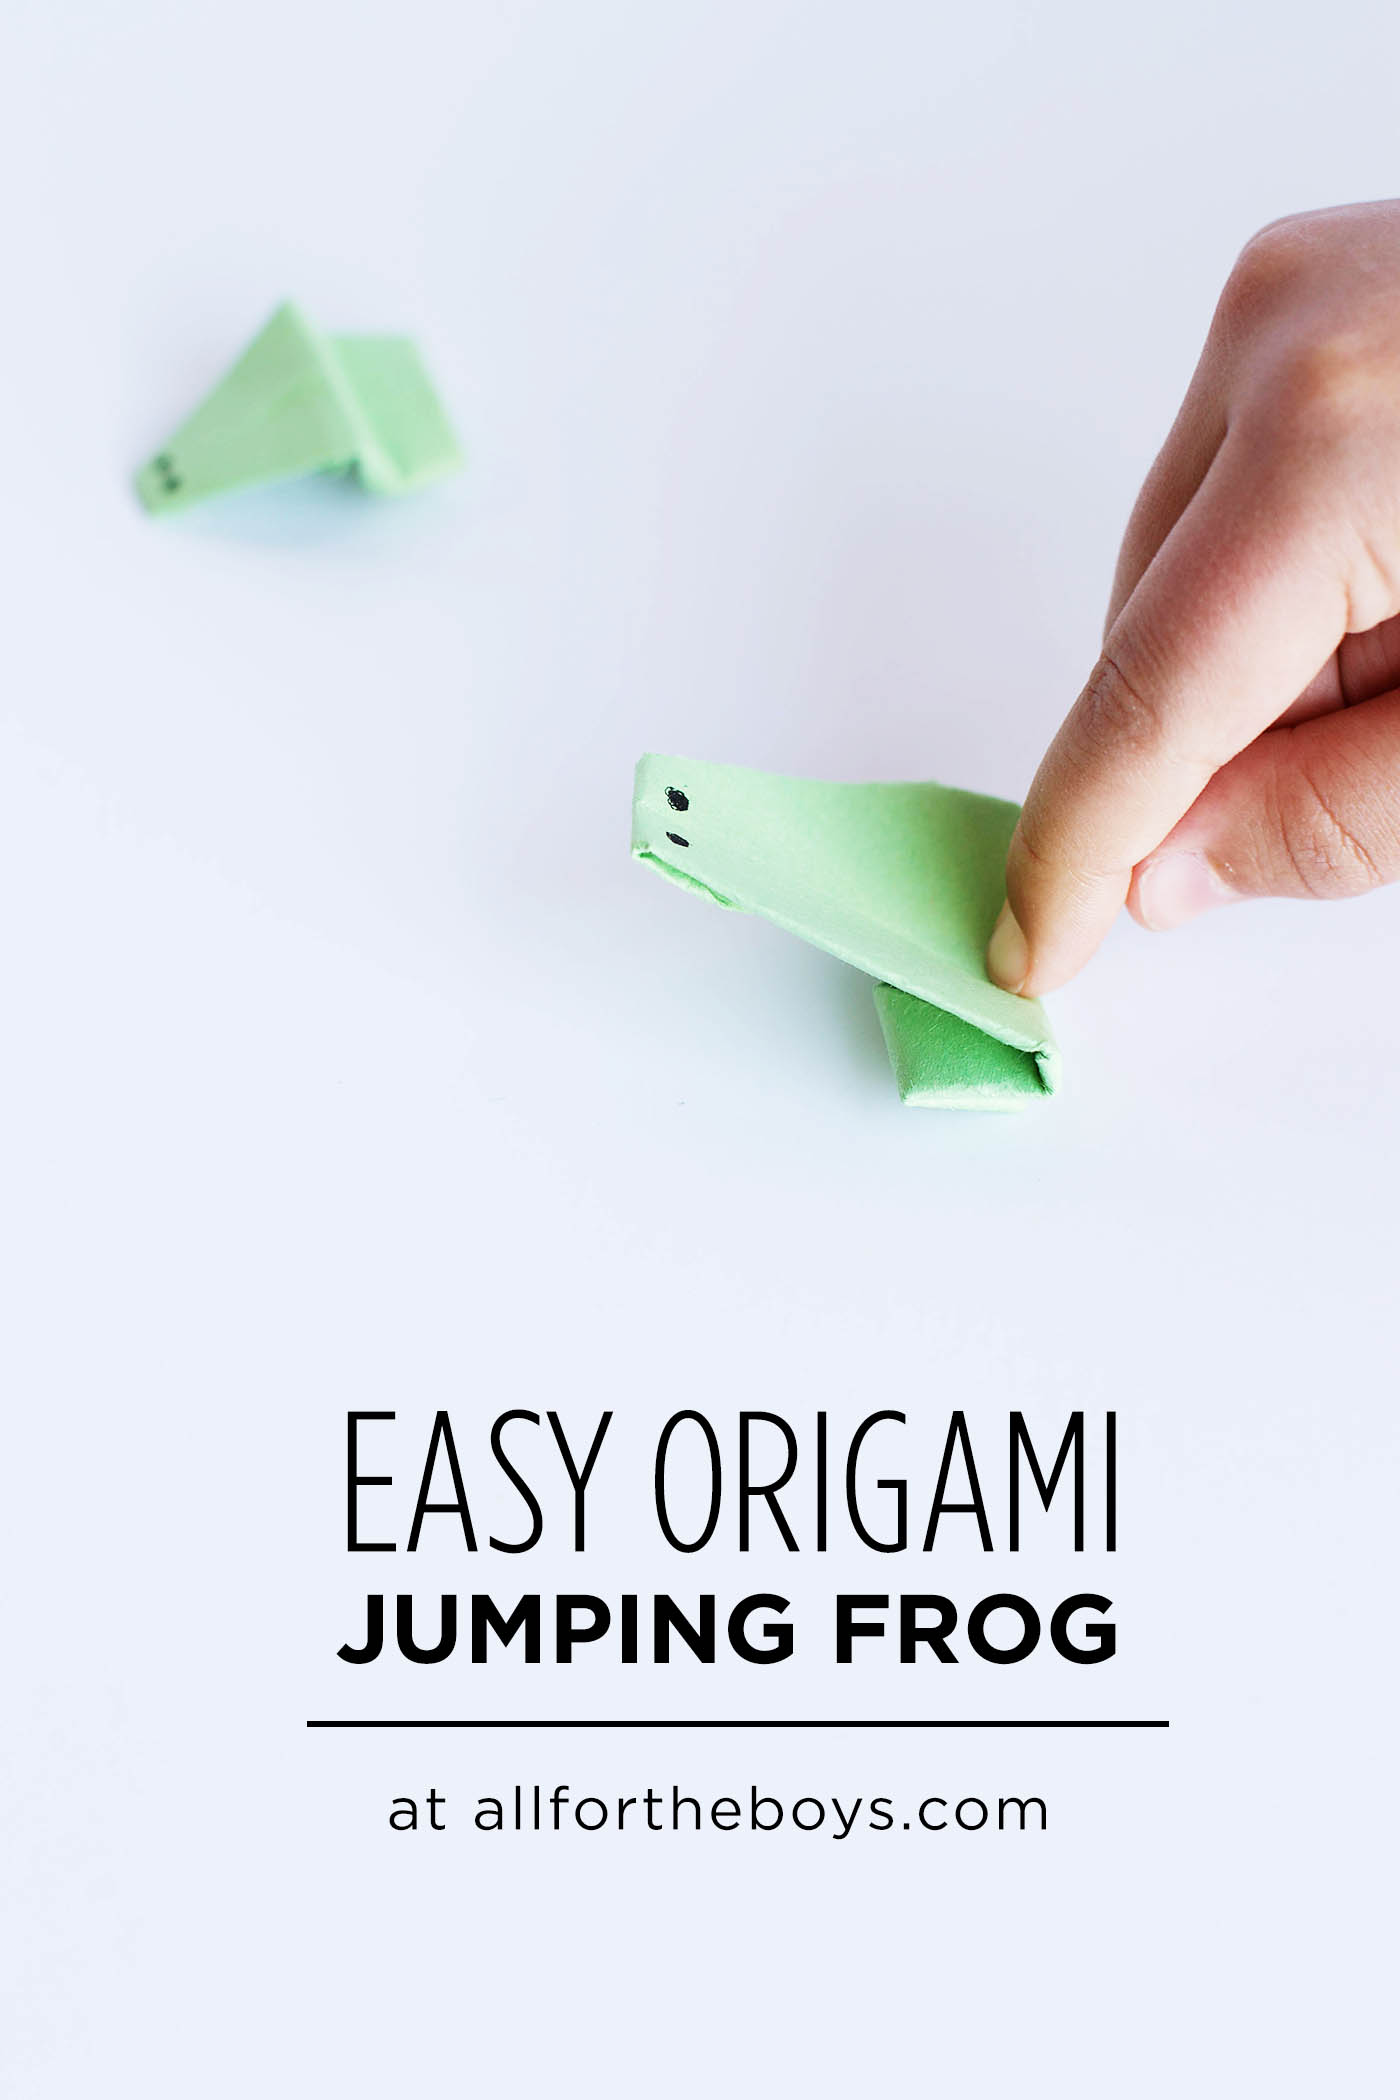 Easy origami - frog that really jumps!